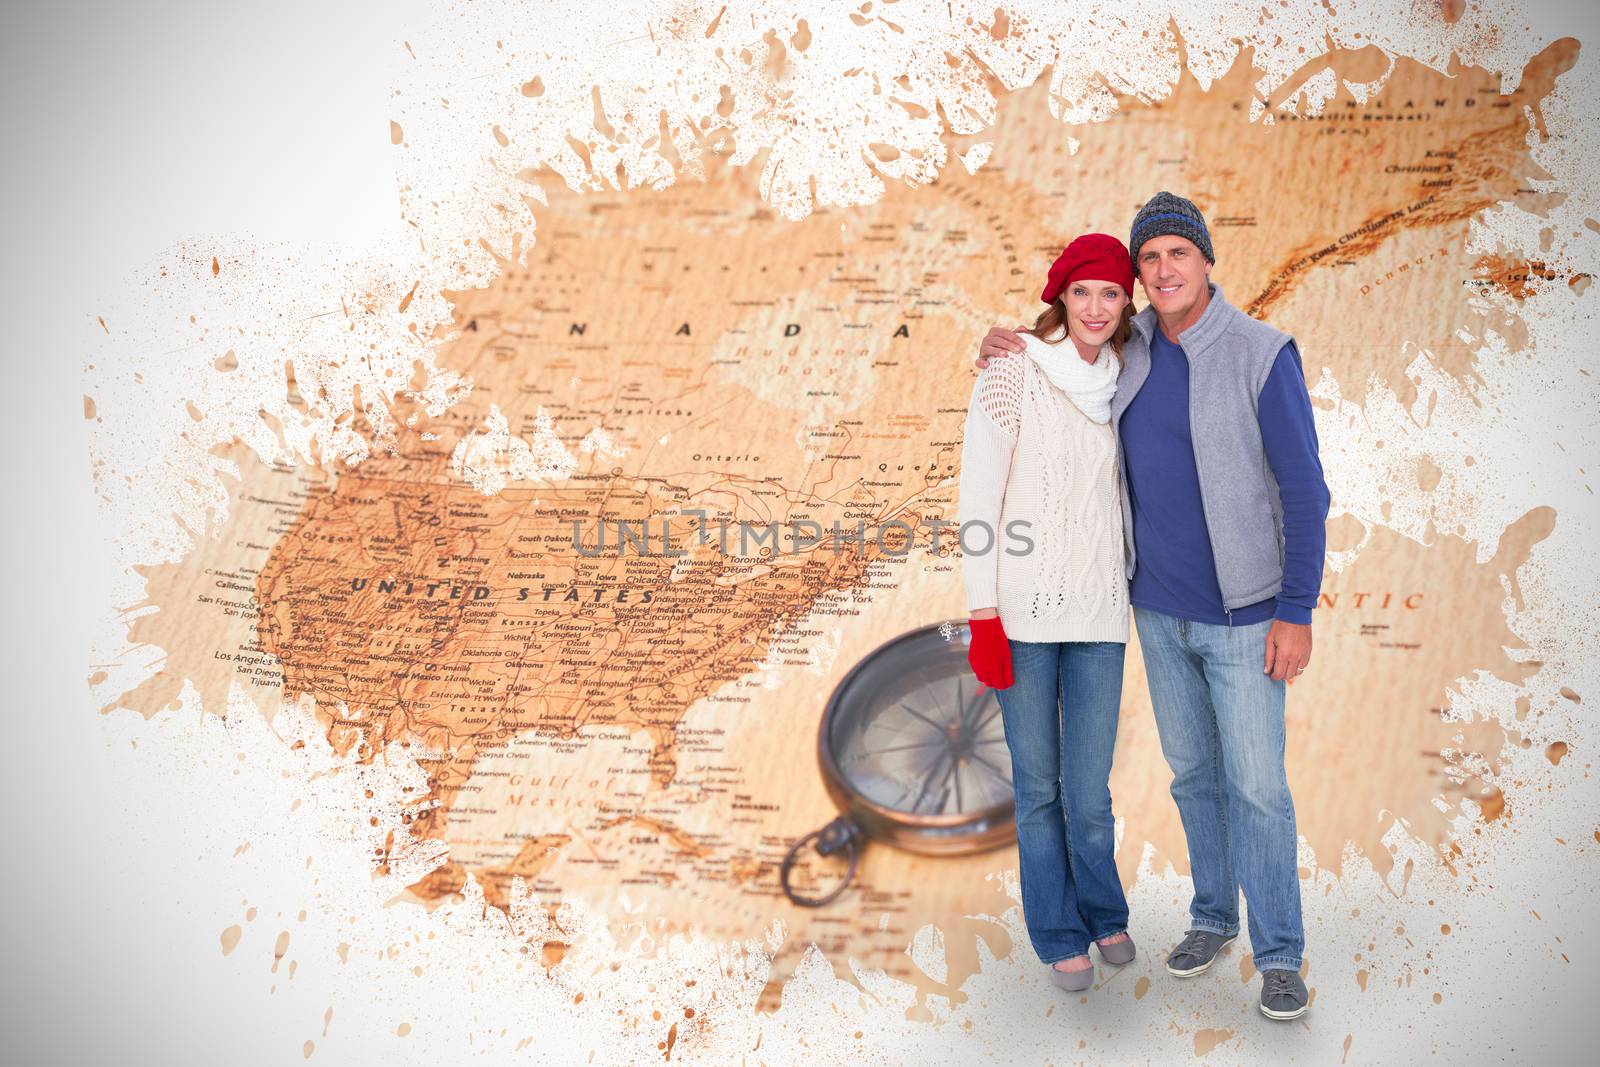 Composite image of happy couple in warm clothing by Wavebreakmedia